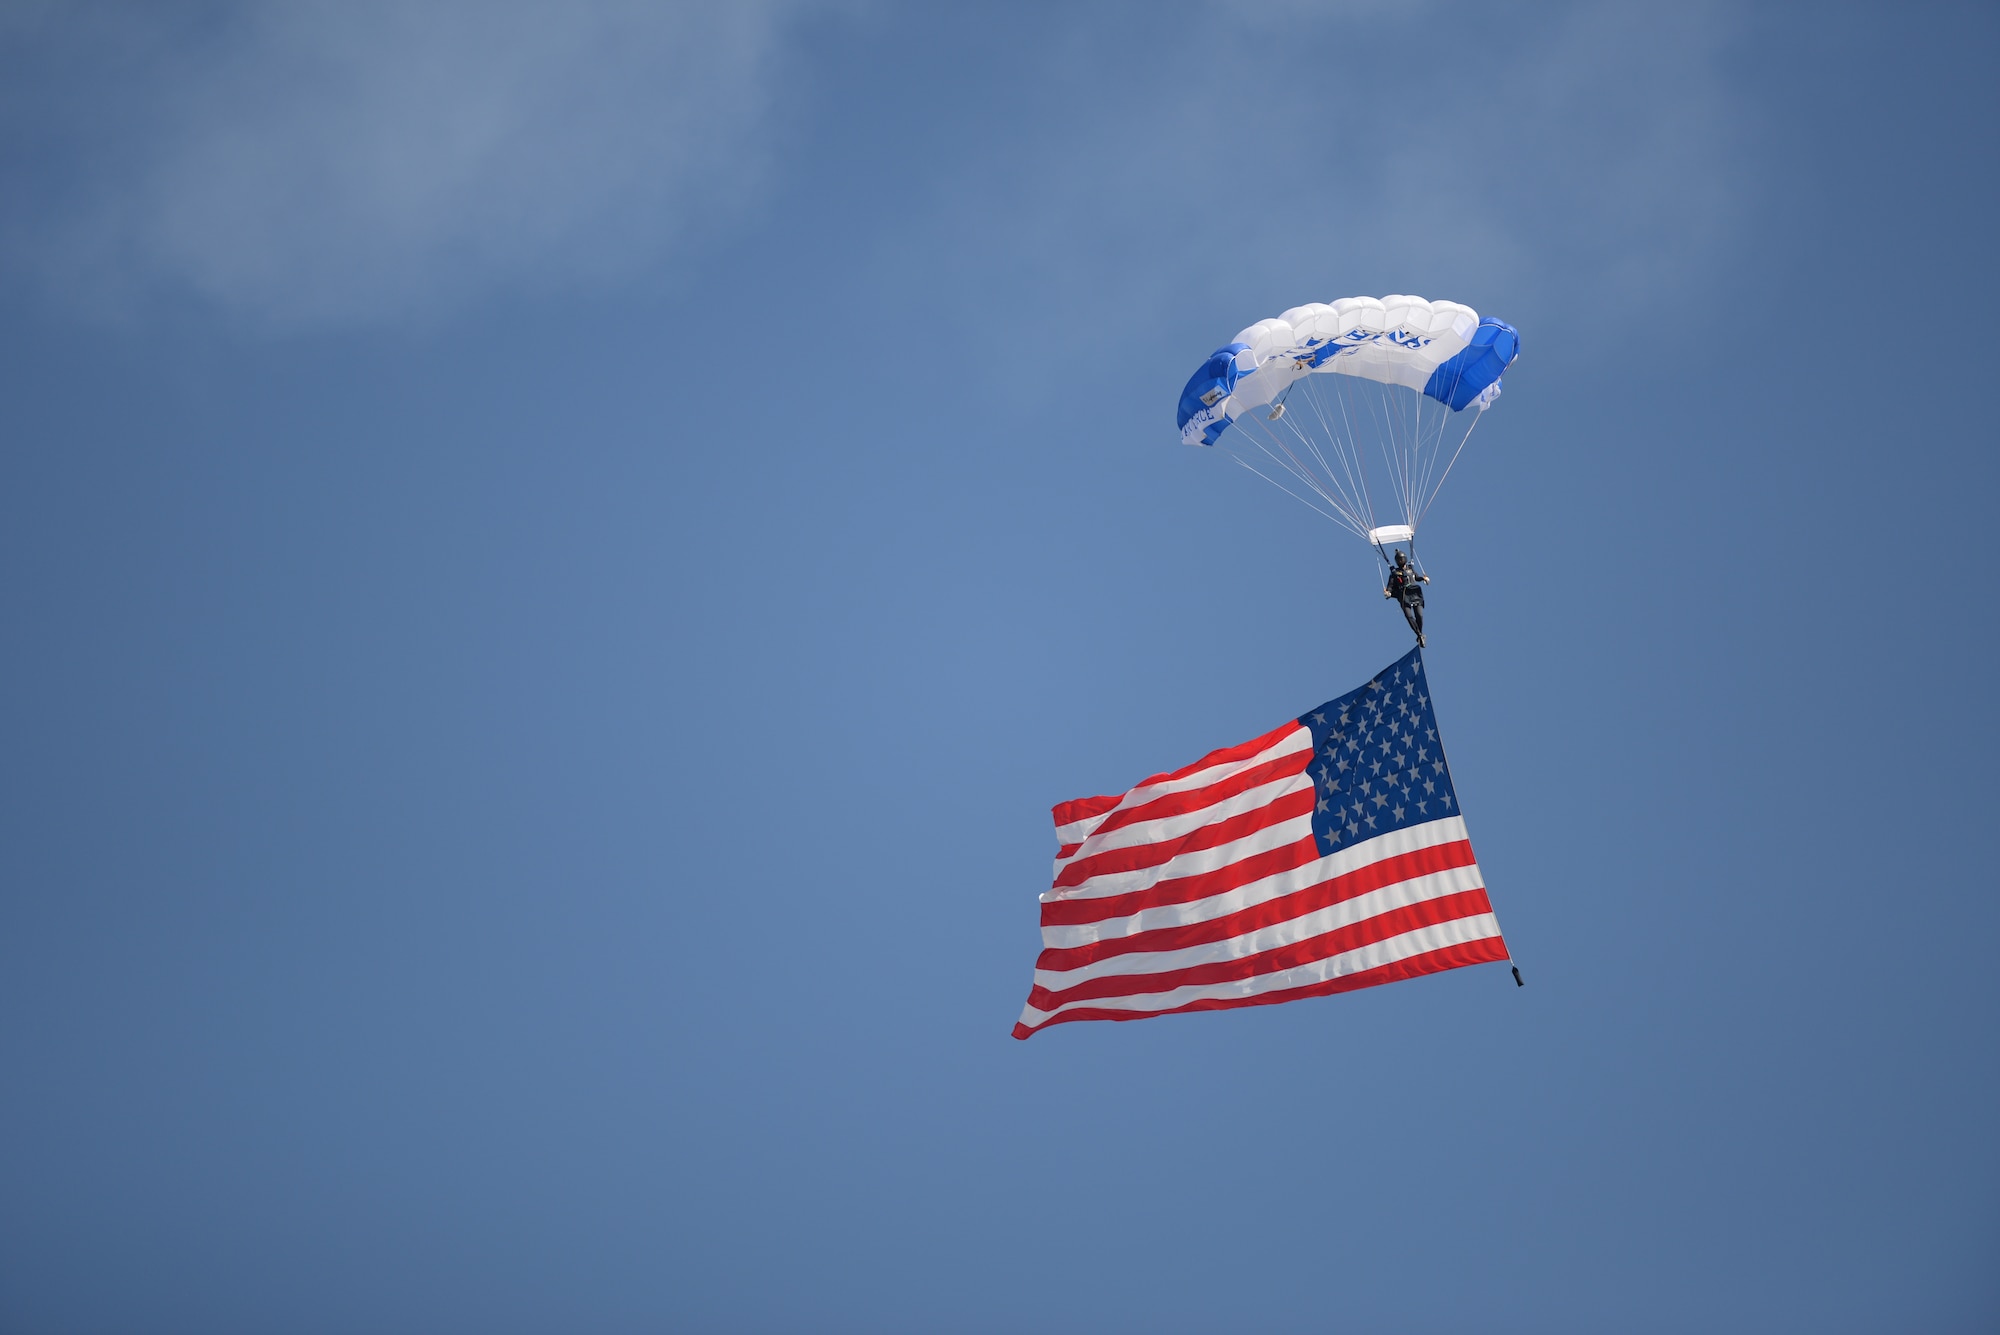 A parachutist glides down after jumping out of an aircraft holding an American flag during an air show